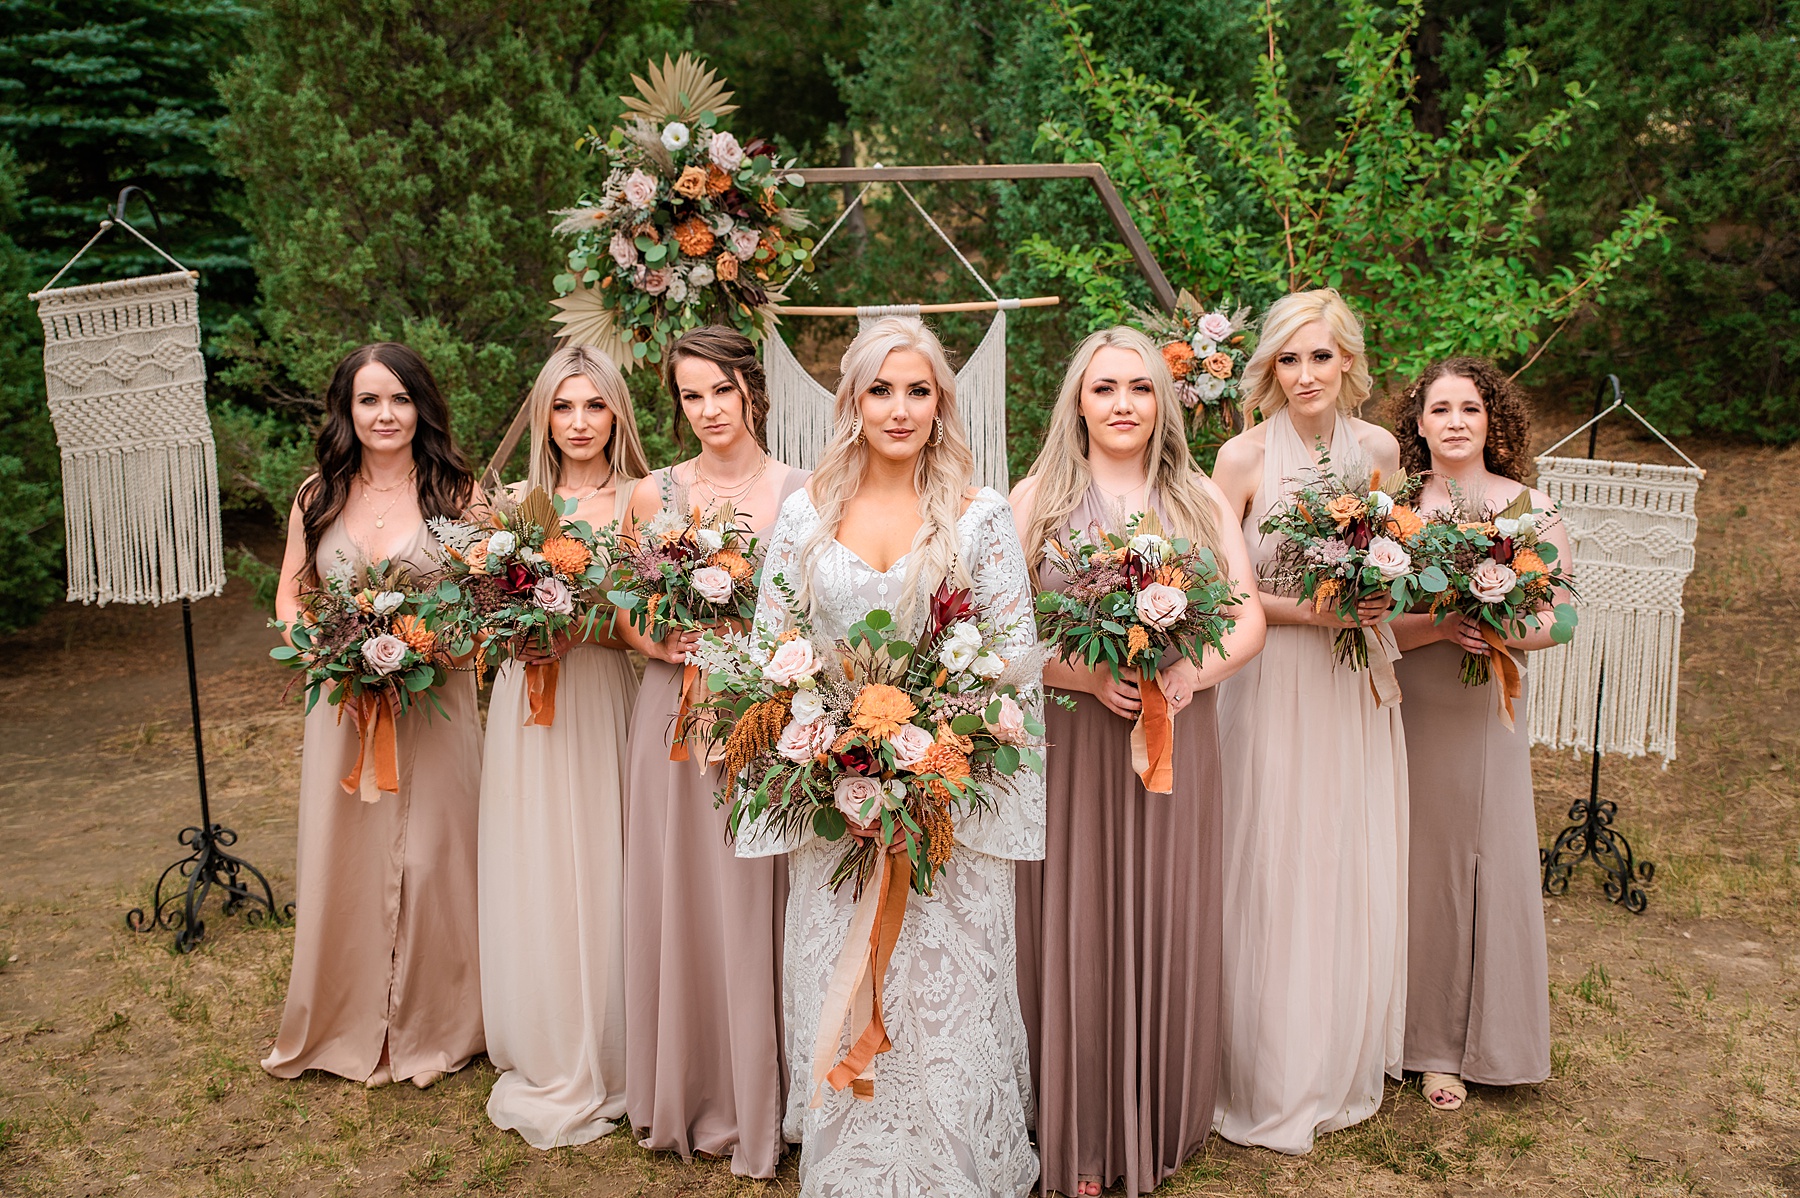 Jackson Hole wedding photographer captures bride standing with bridesmaids wearing varying shades of pink bridesmaid dresses